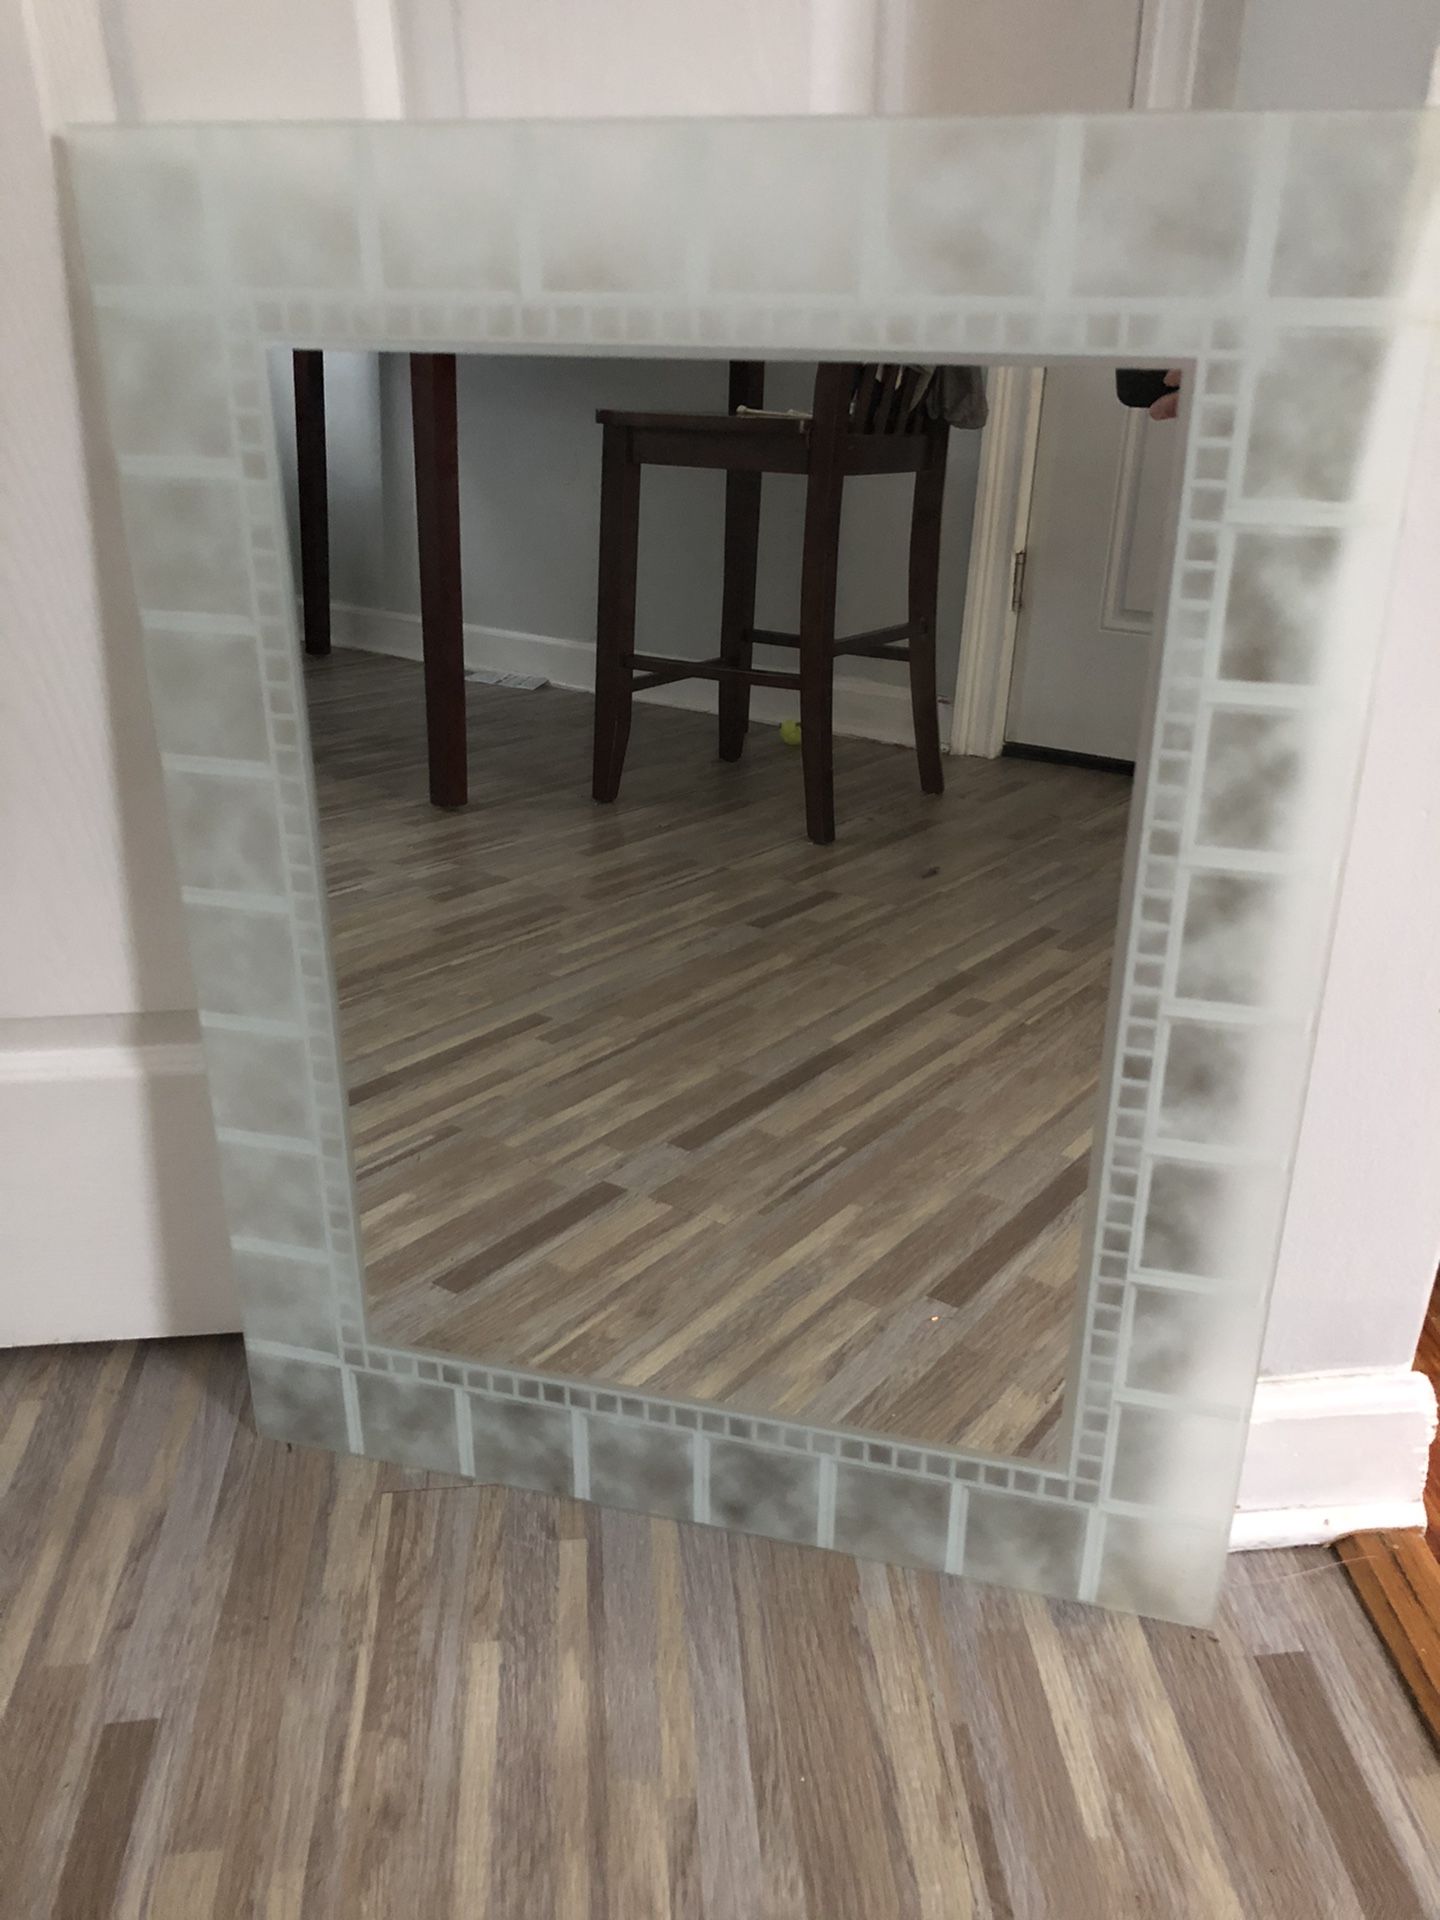 DECORATIVE FROSTED GLASS MIRROR